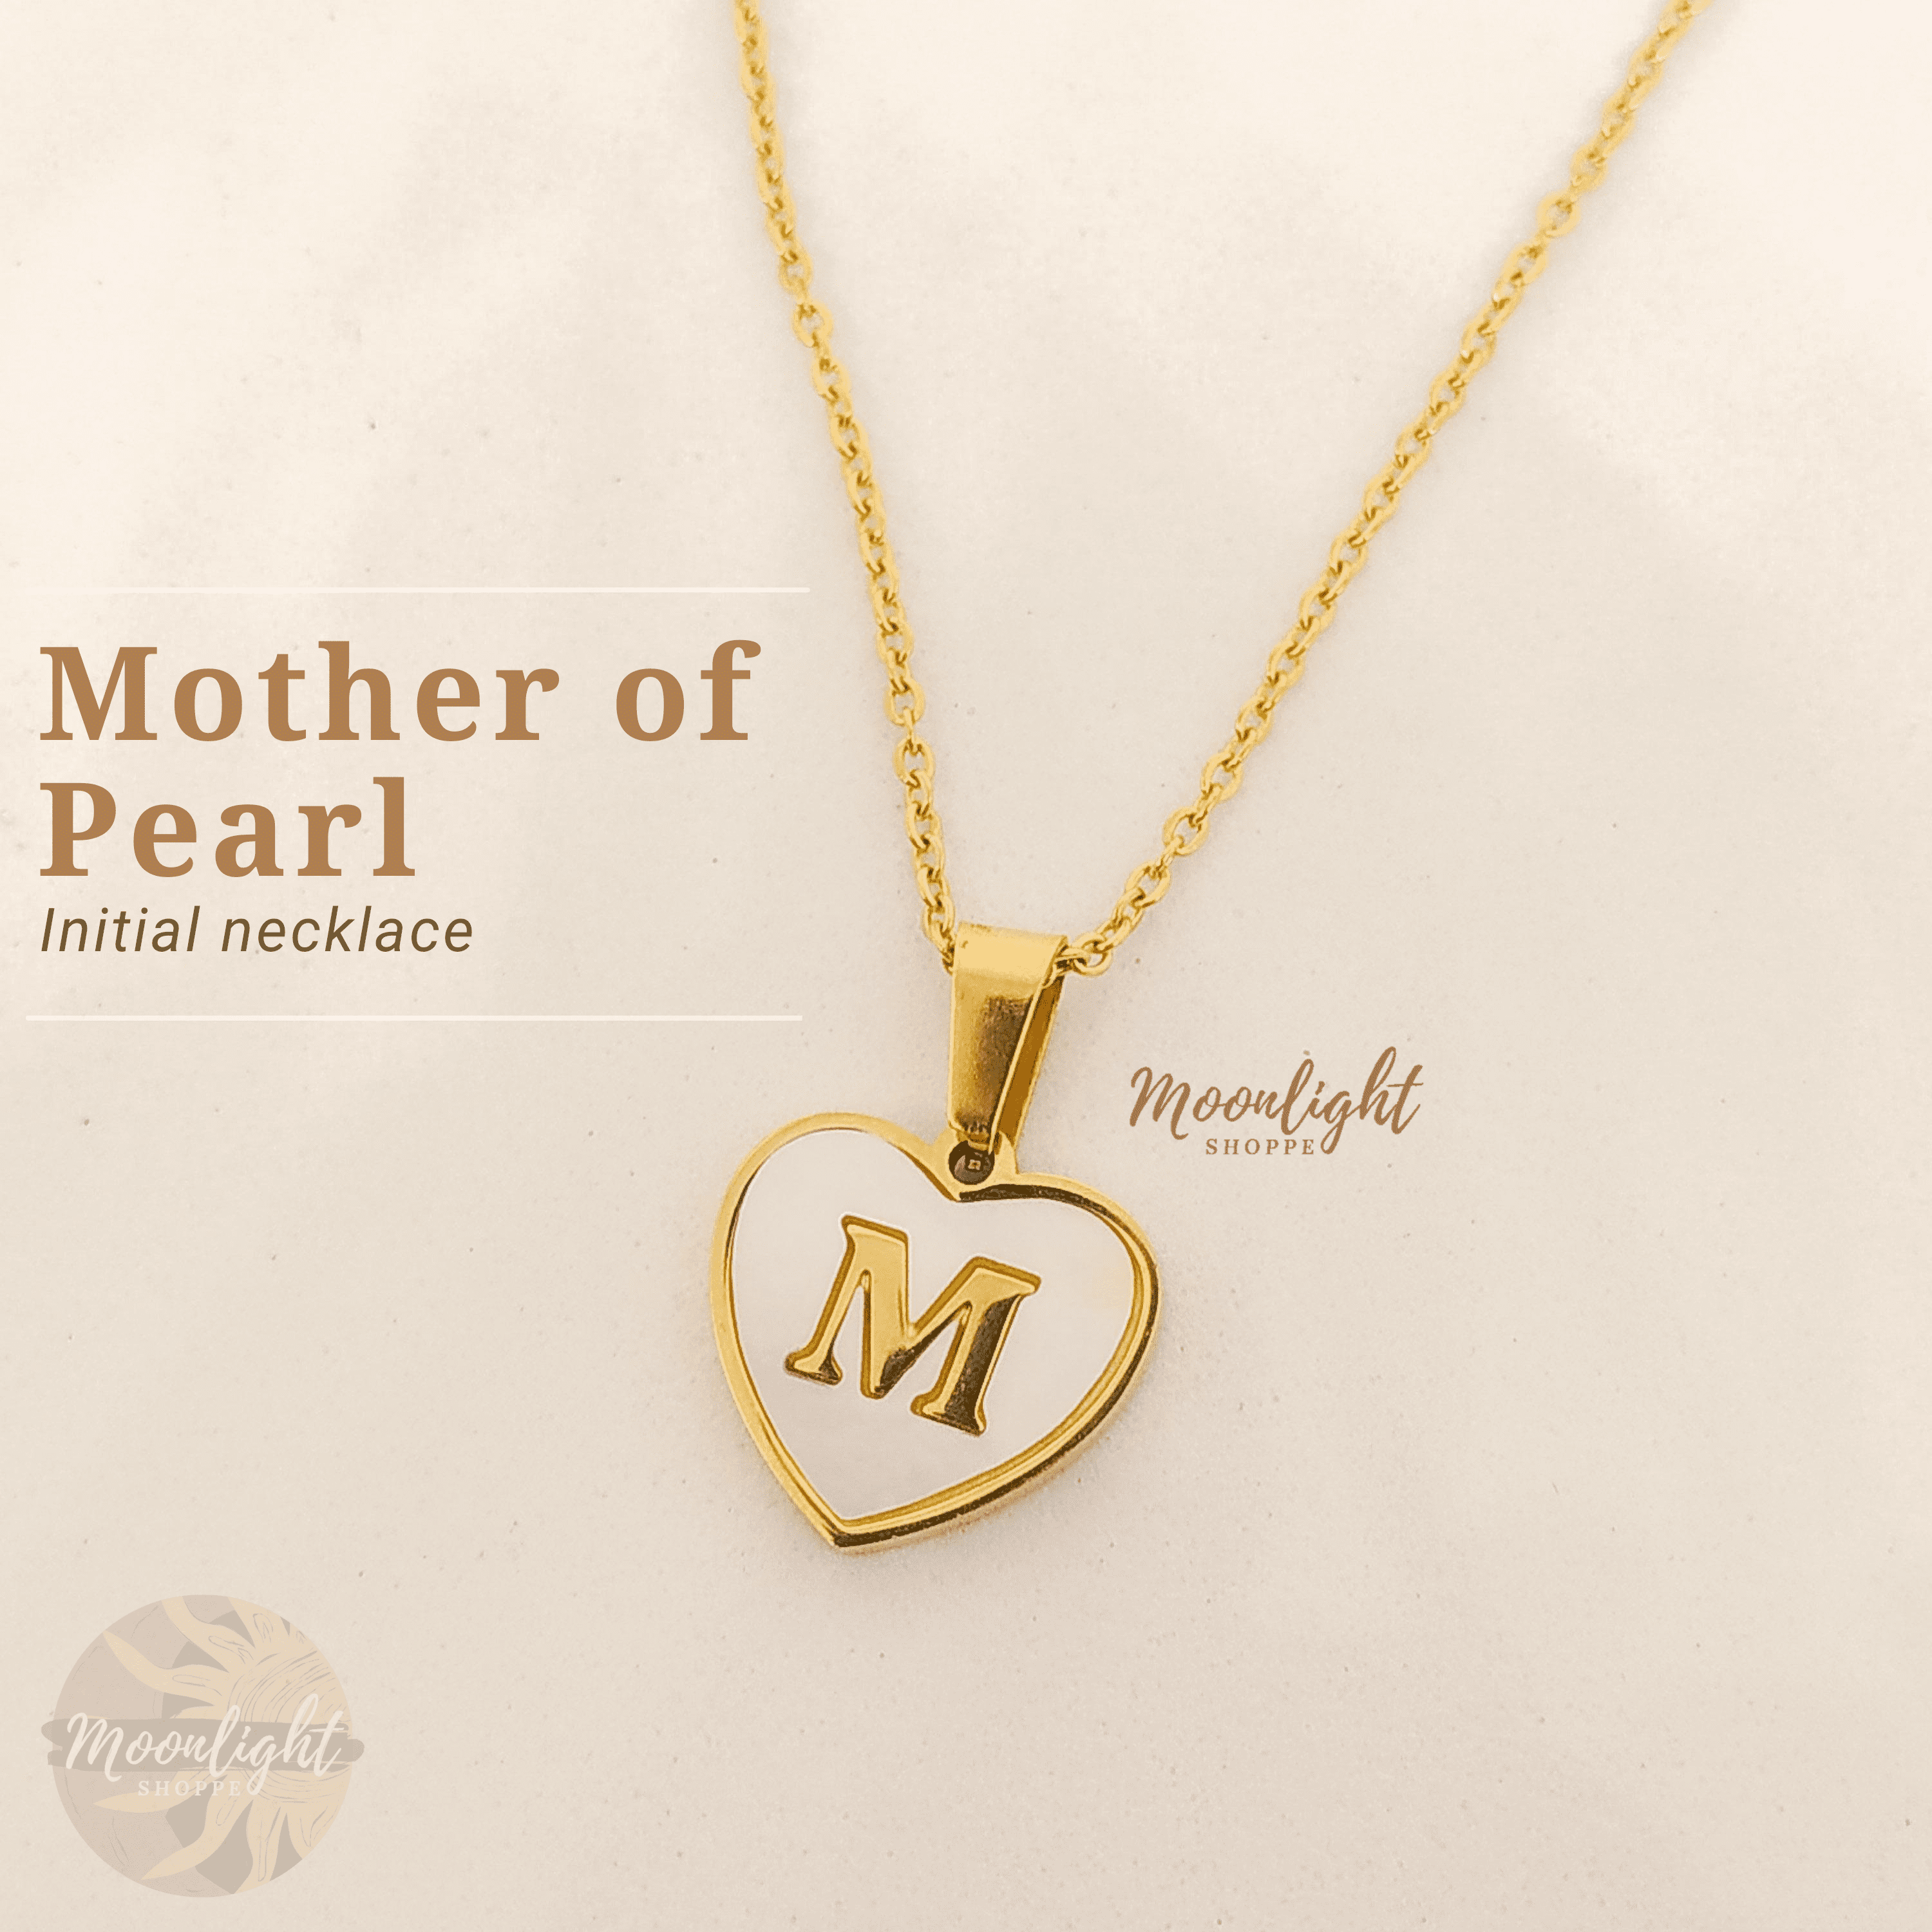 Chain Link Initial Pendant Featuring Genuine Mother Of Pearl -  Approximately 15